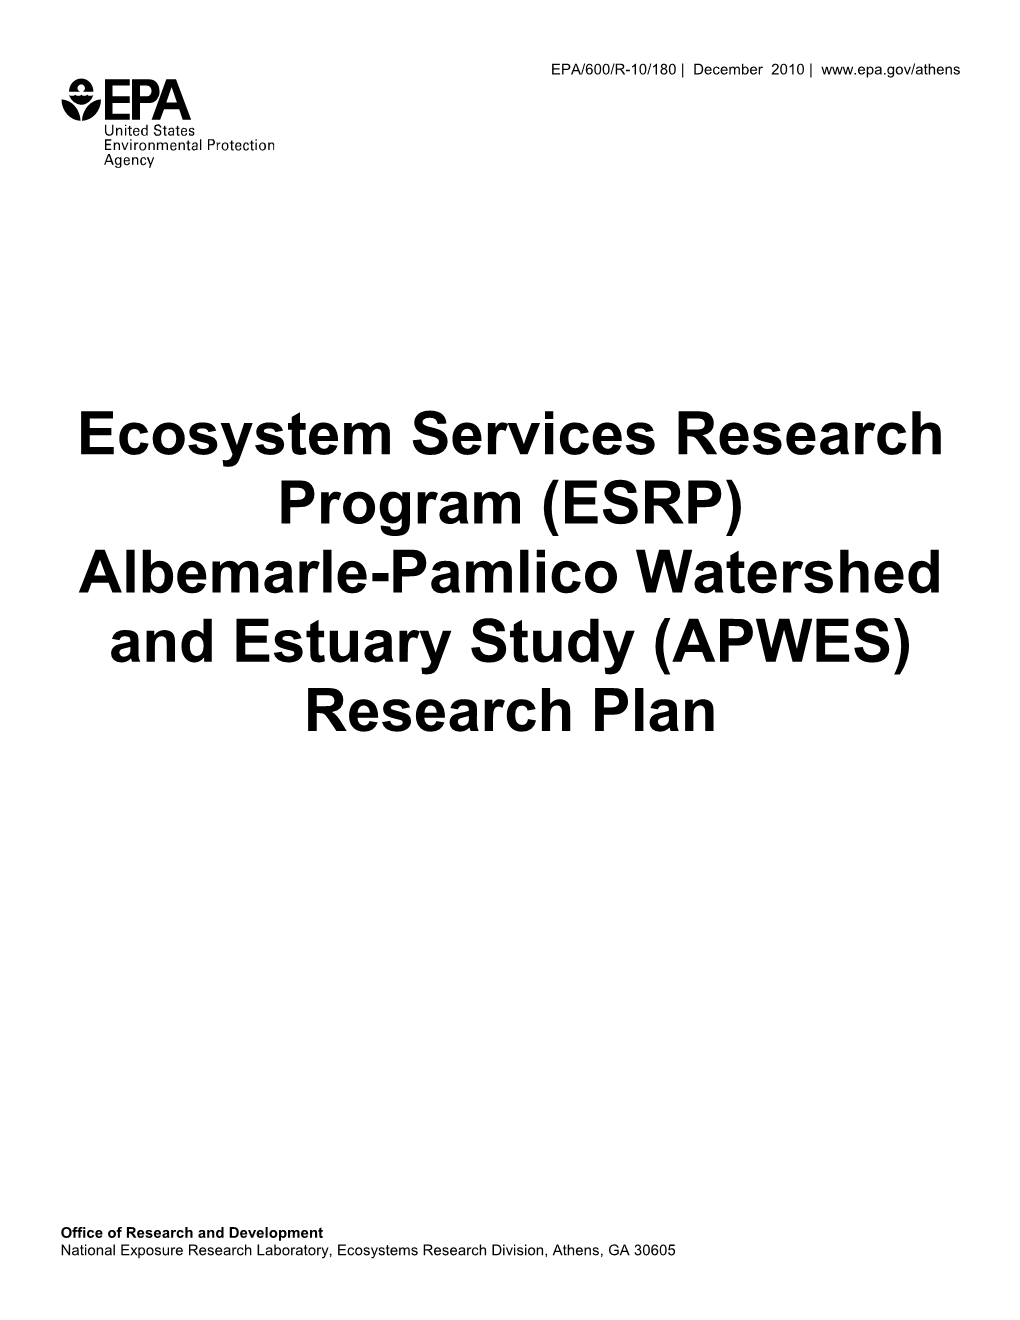 Albemarle-Pamlico Watershed and Estuary Study (APWES) Research Plan